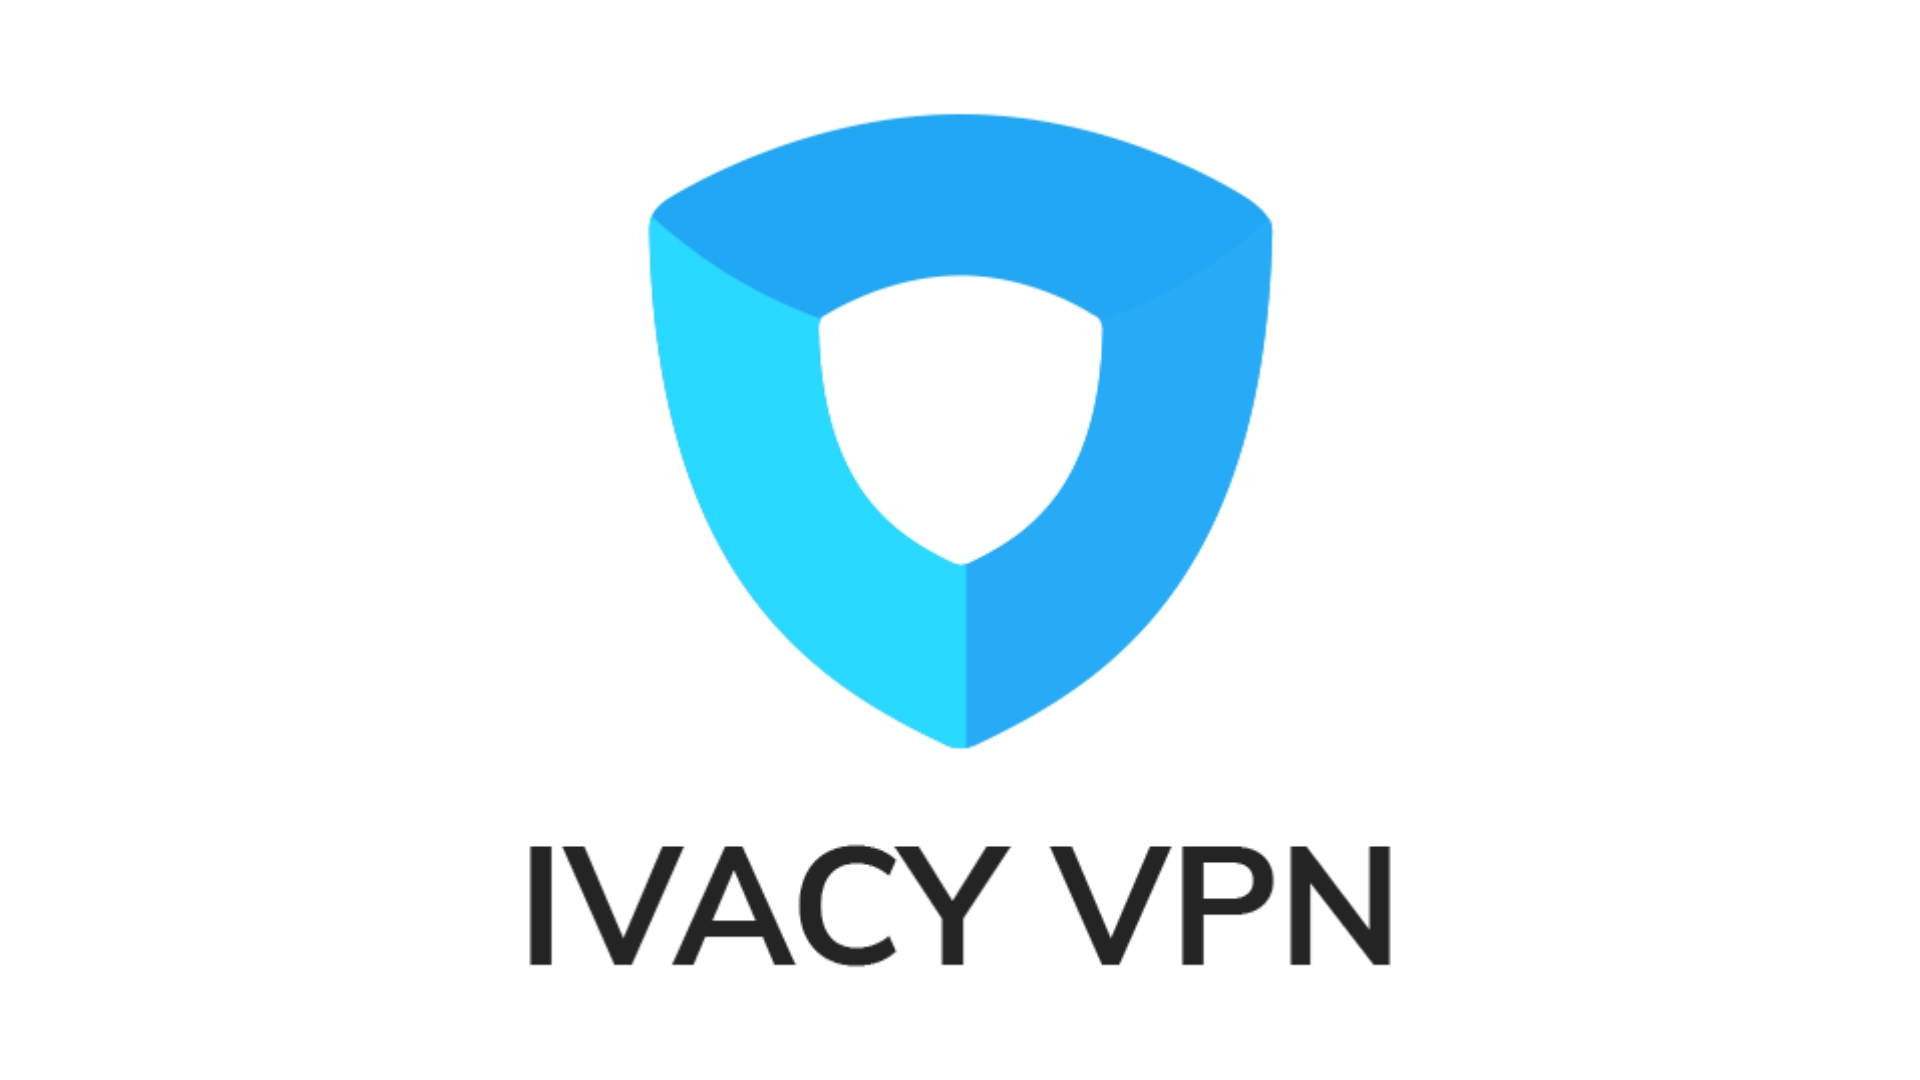 Best VPN for streaming, Ivacy. Image shows the company's logo on a white background.